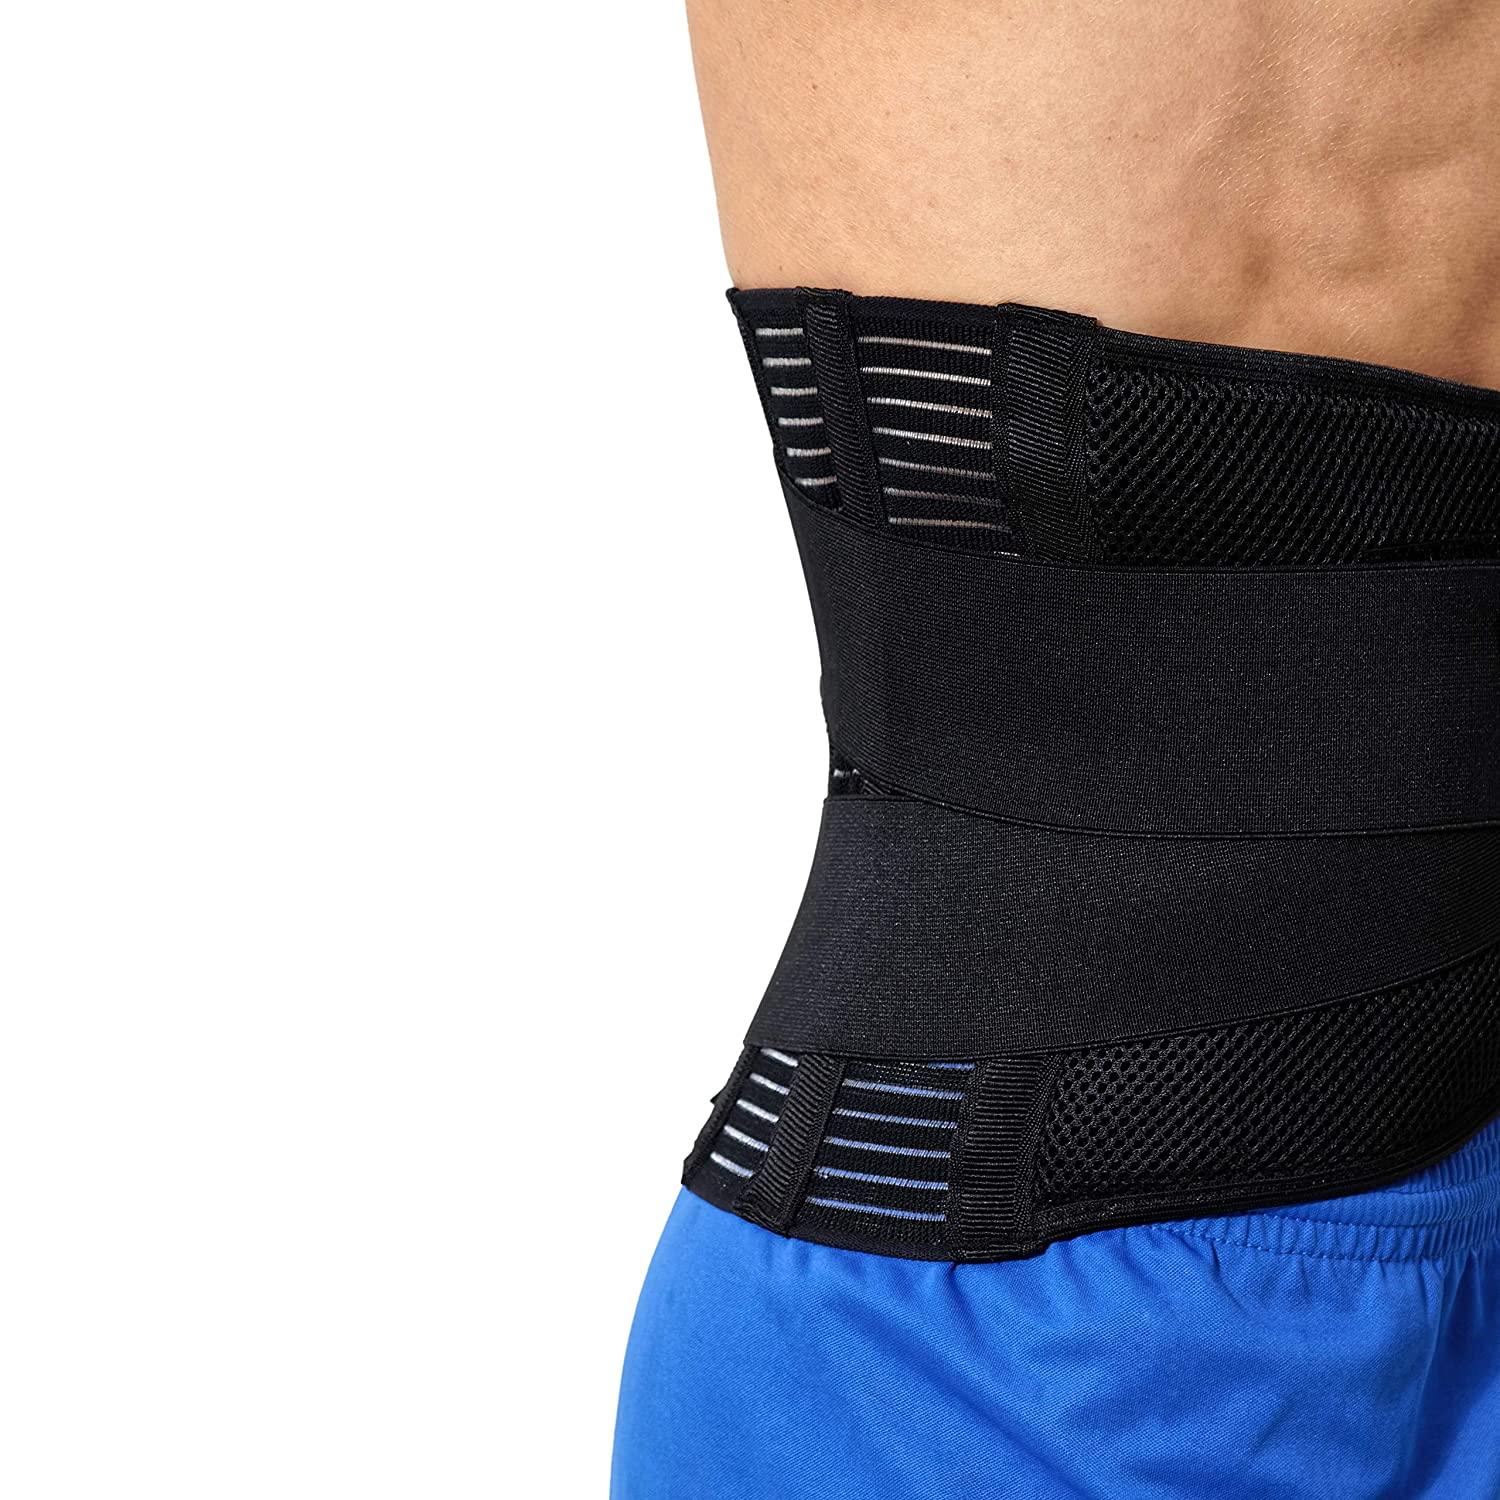 NeoTech Care Adjustable Compression Wide Back Brace Lumbar Support Belt  (Charcoal, Size M) M Charcoal